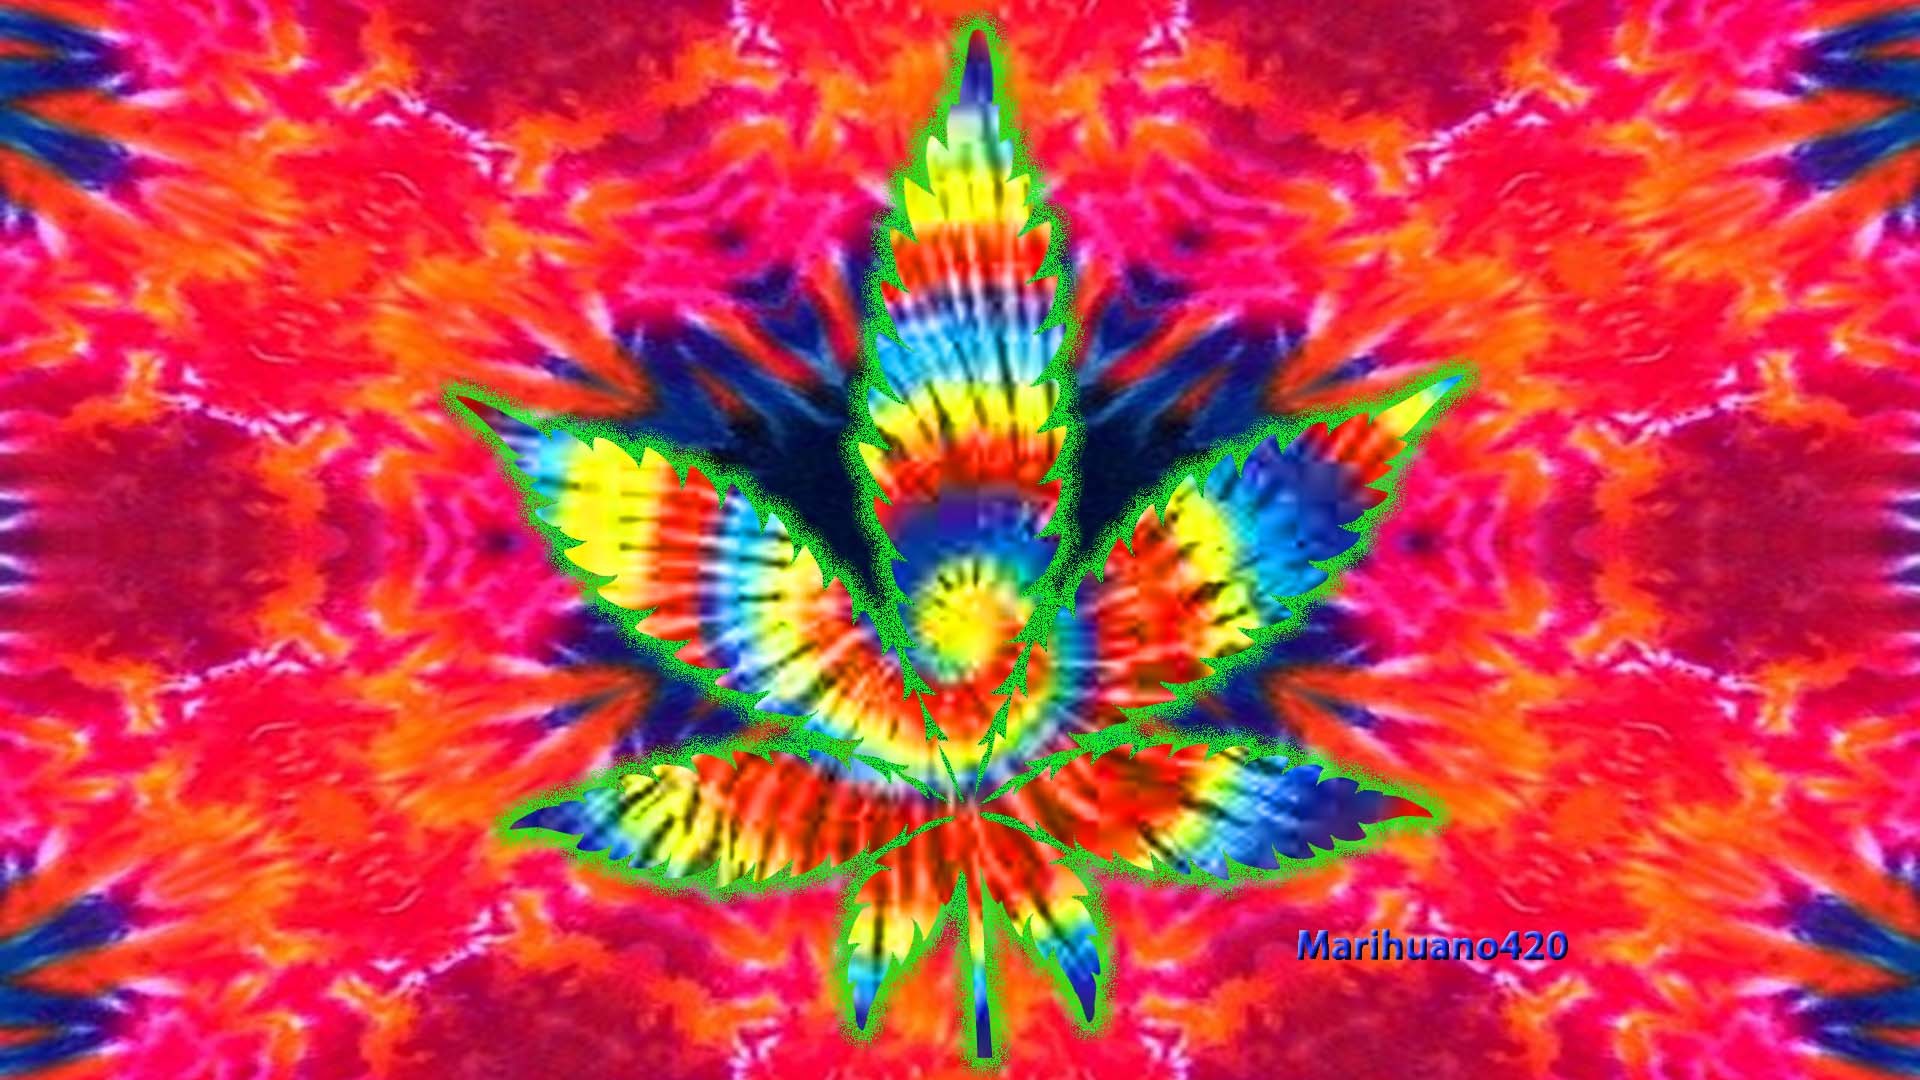 Trippy Weed Backgrounds Tumblr Hippie wallpaper weed